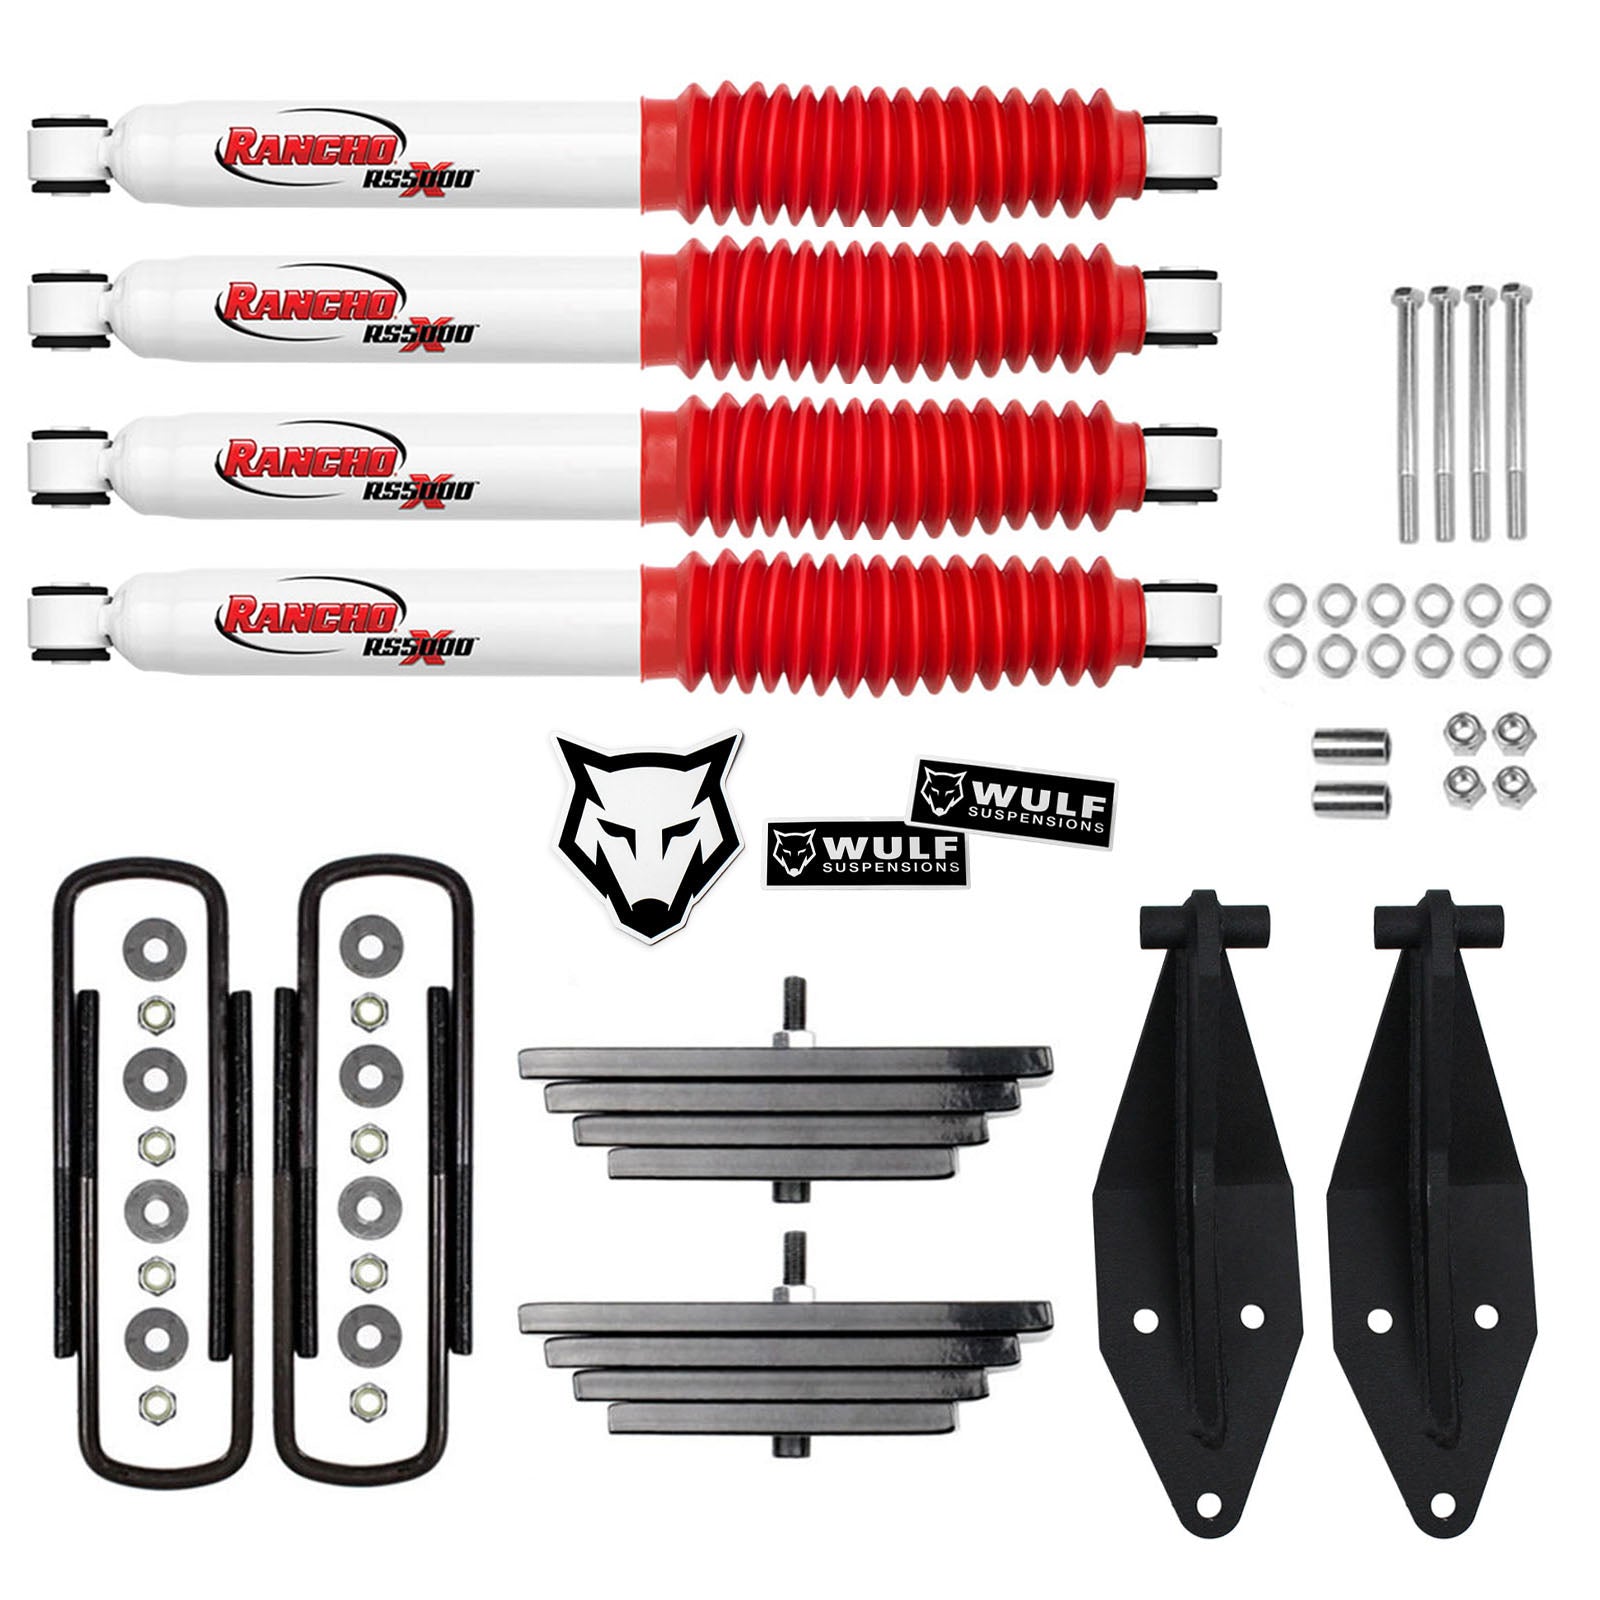 Rancho RS5000X Gas Shocks for 00-05 Excursion 4WD 0 lift